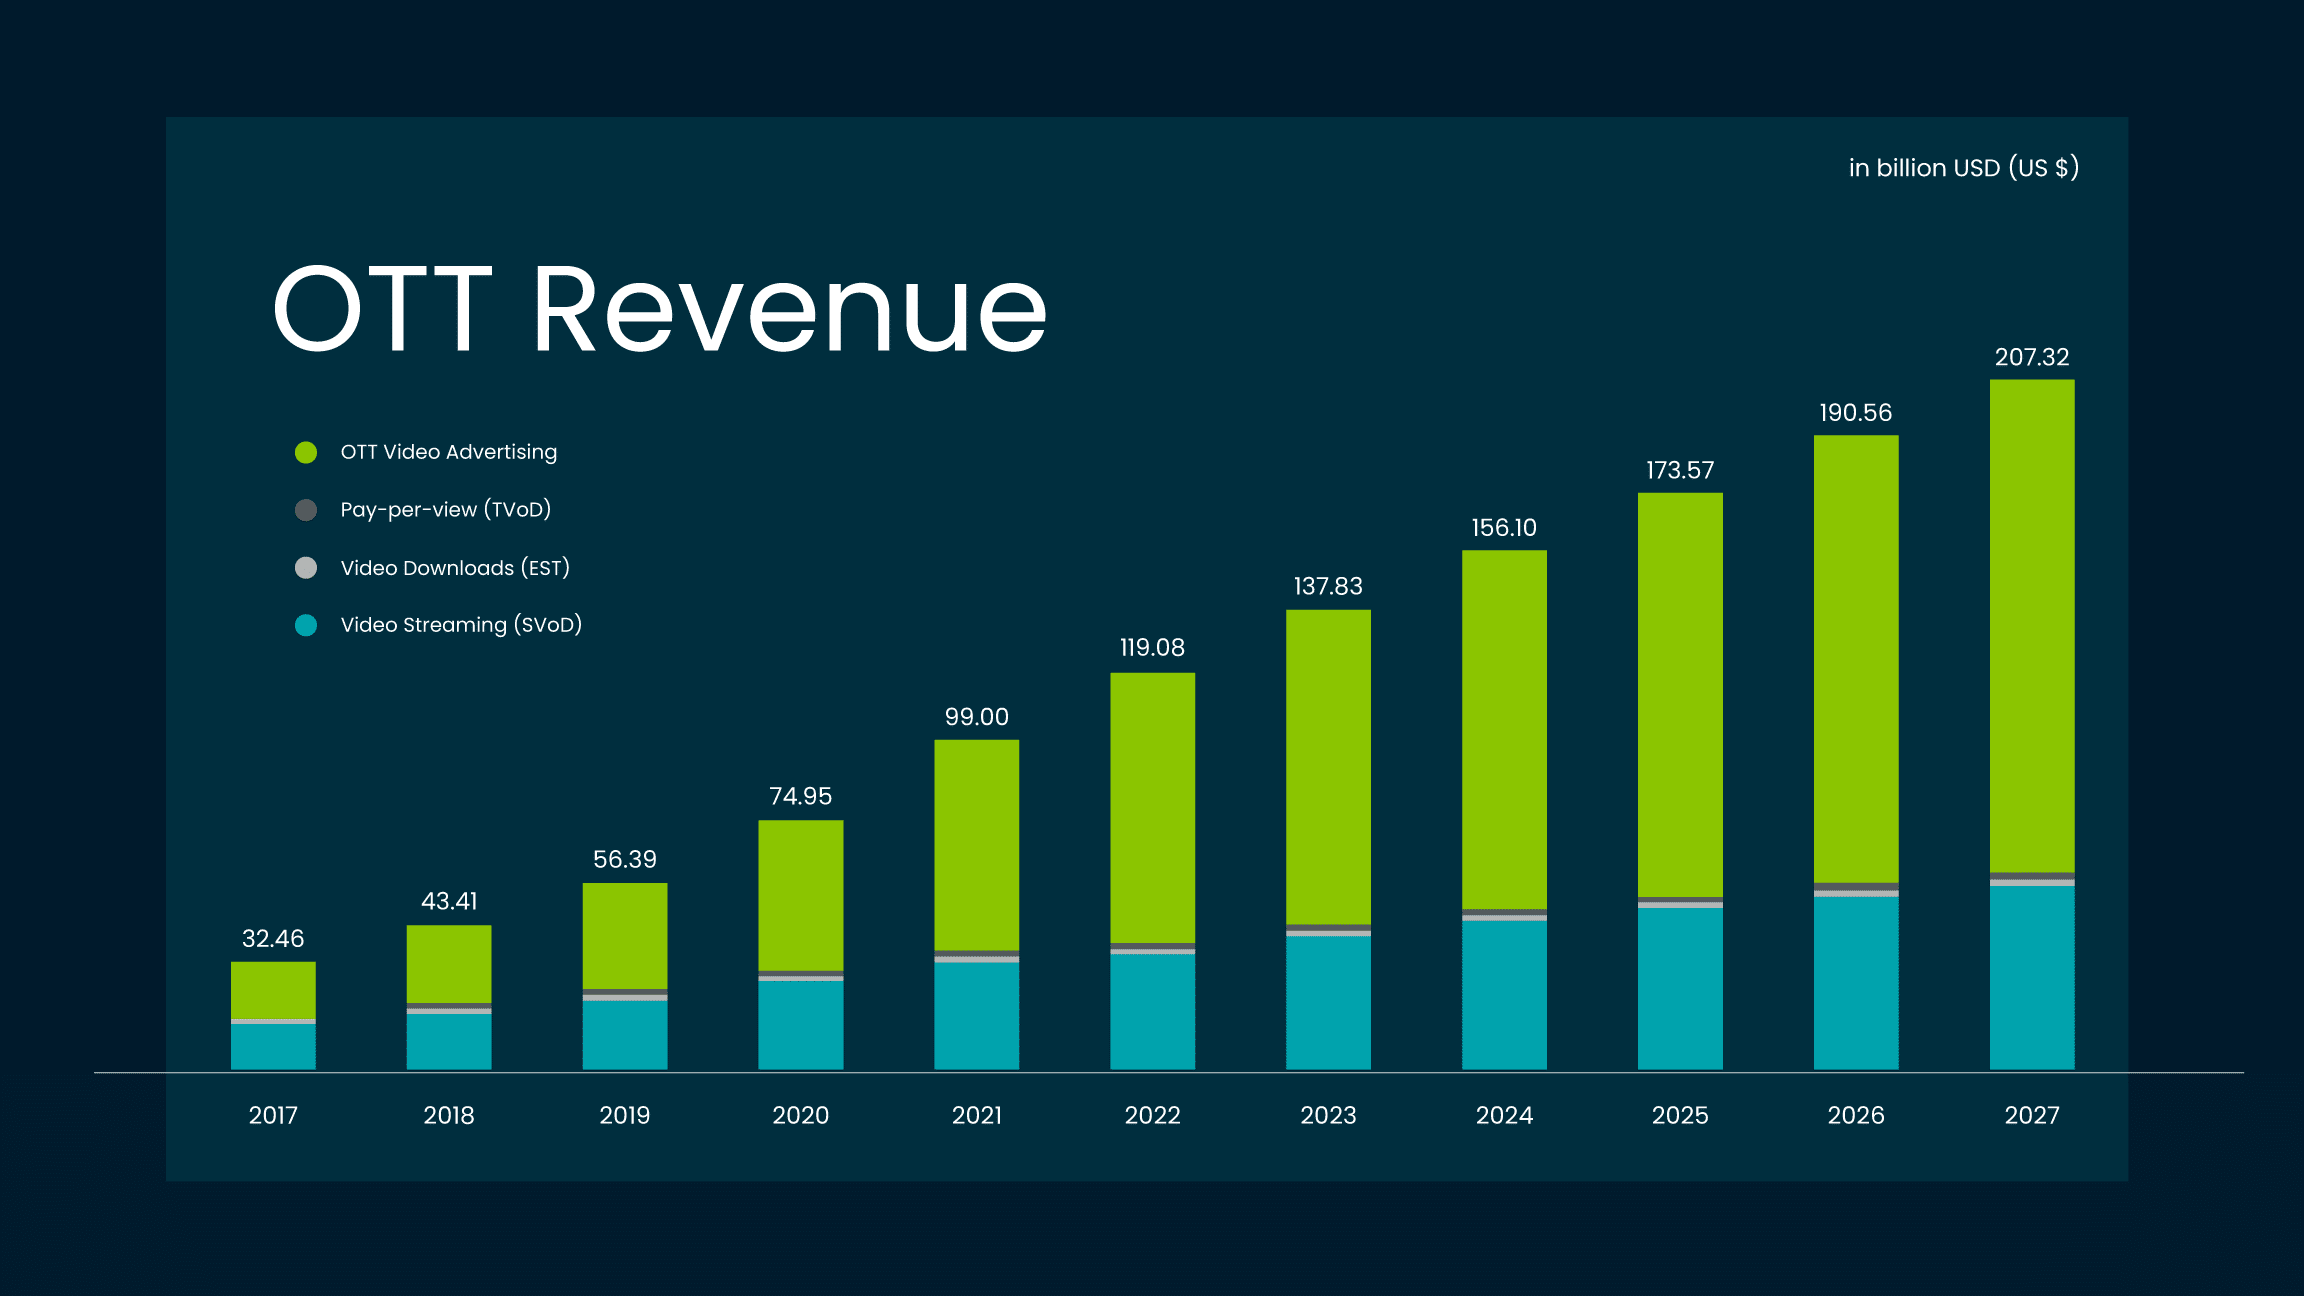 Chart showing OTT revenue growth from 2017 to 2027